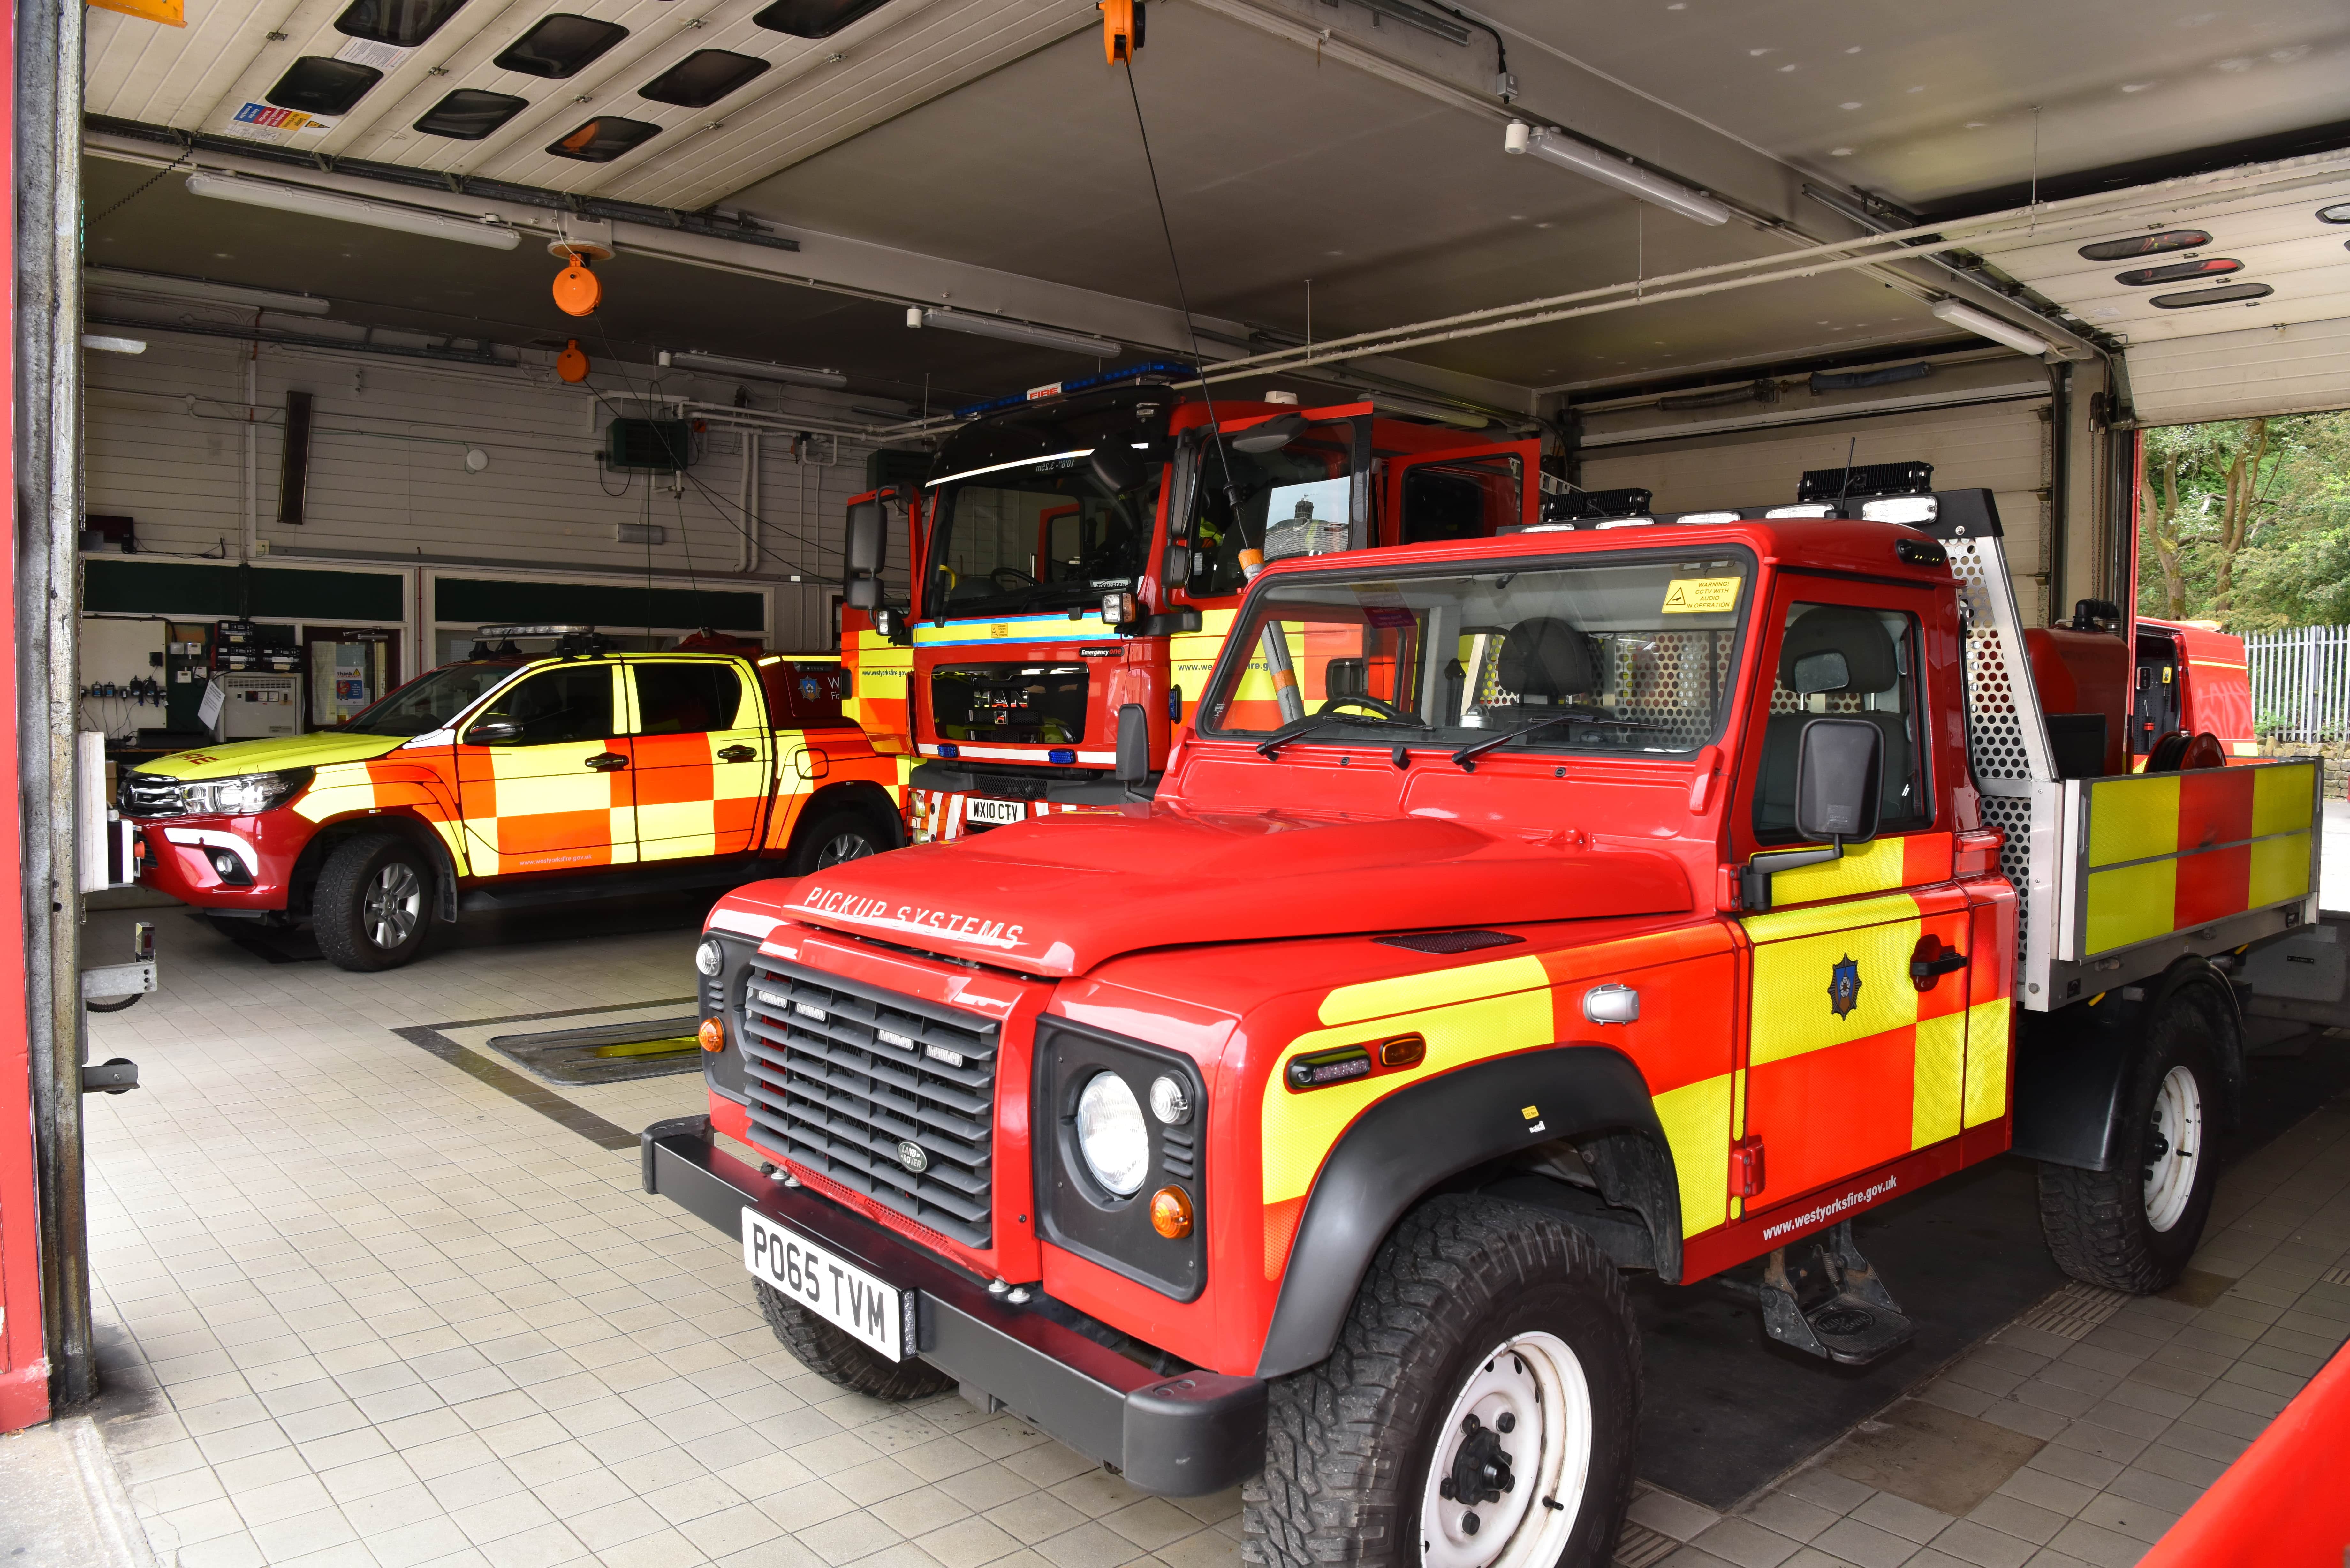 Fire service Land Rover in fire station. 